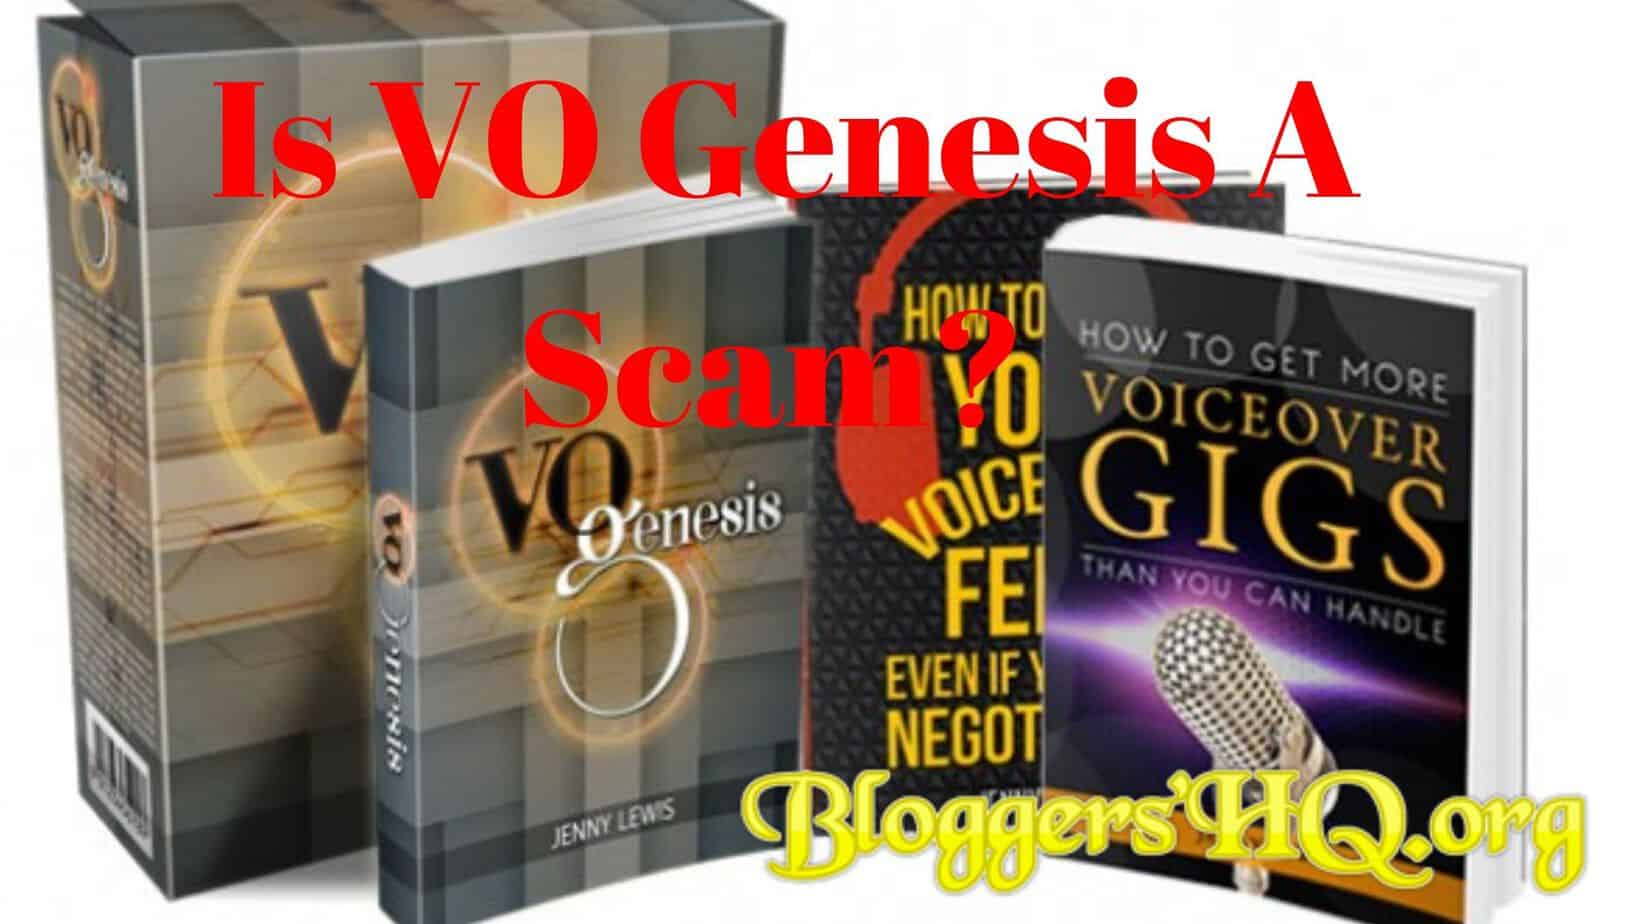 Is VO Genesis A Scam